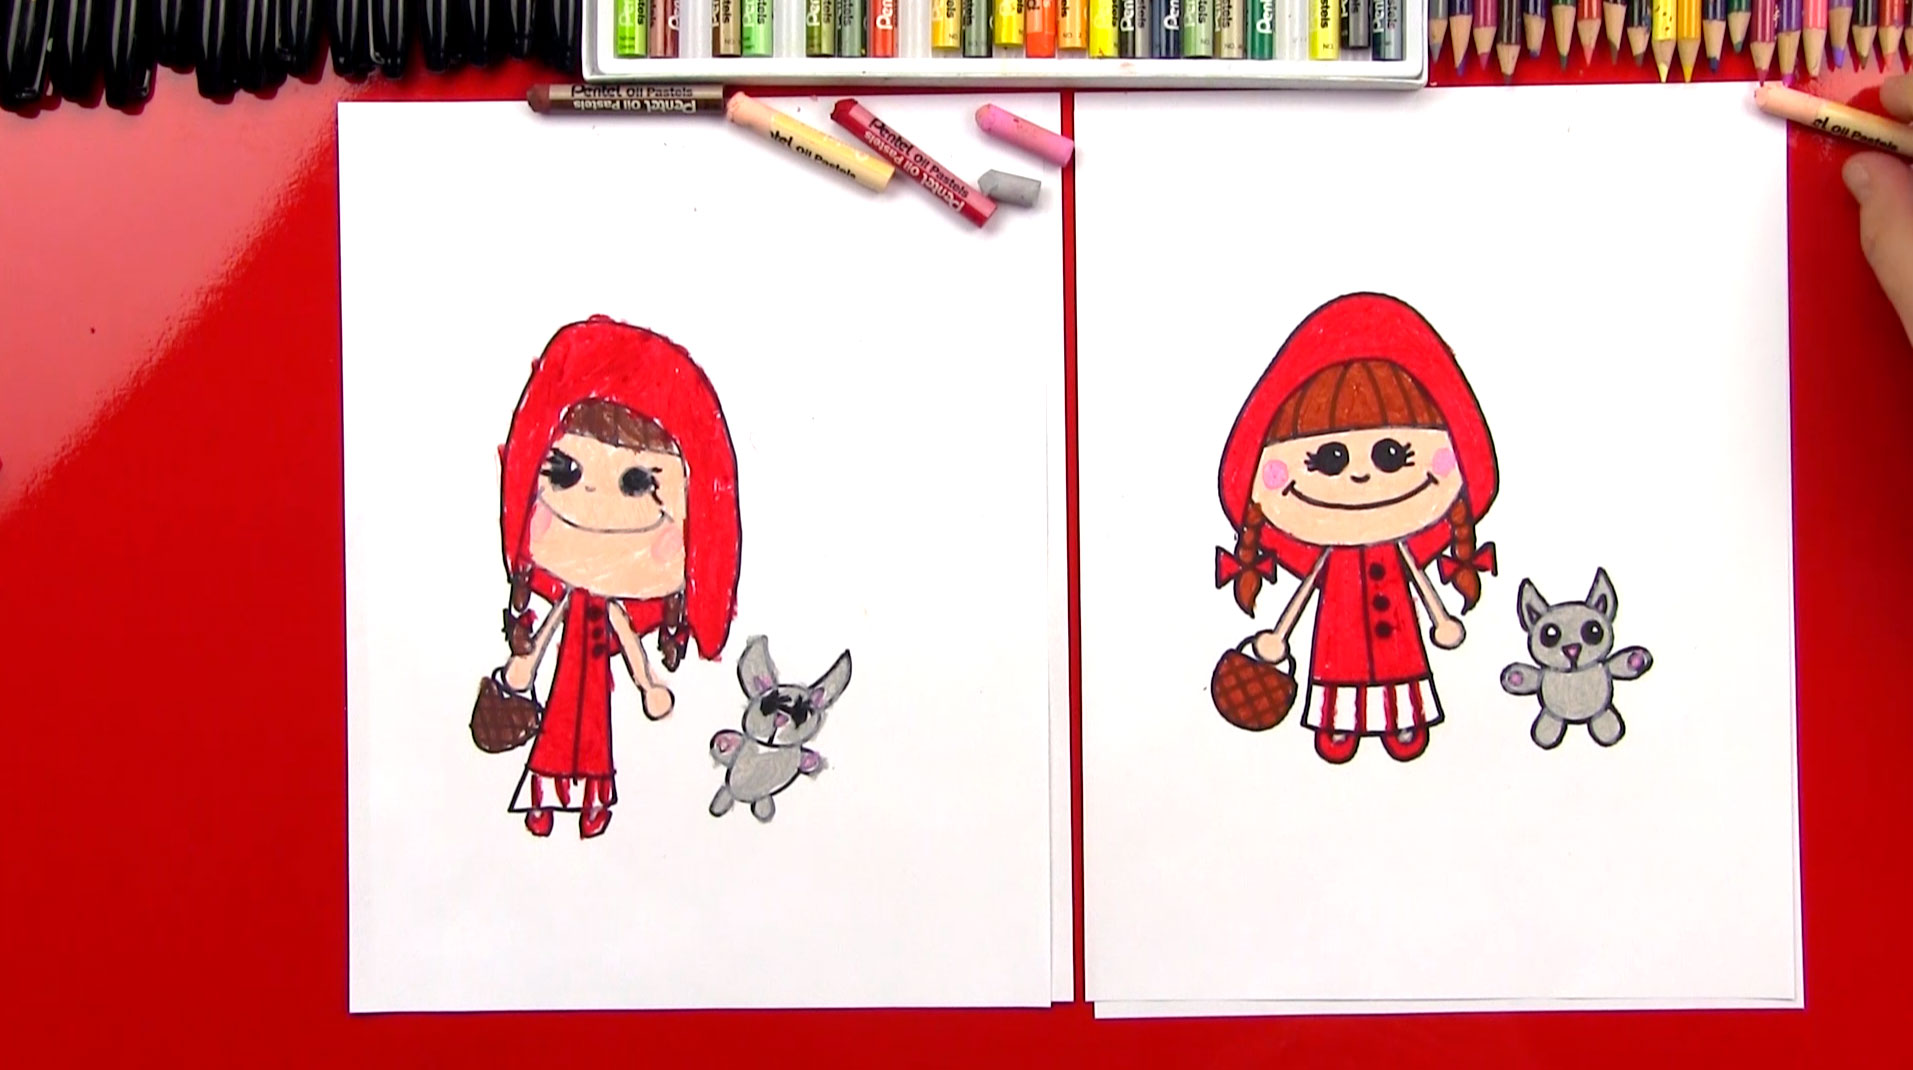 How To Draw Little Red Riding Hood - Art For Kids Hub